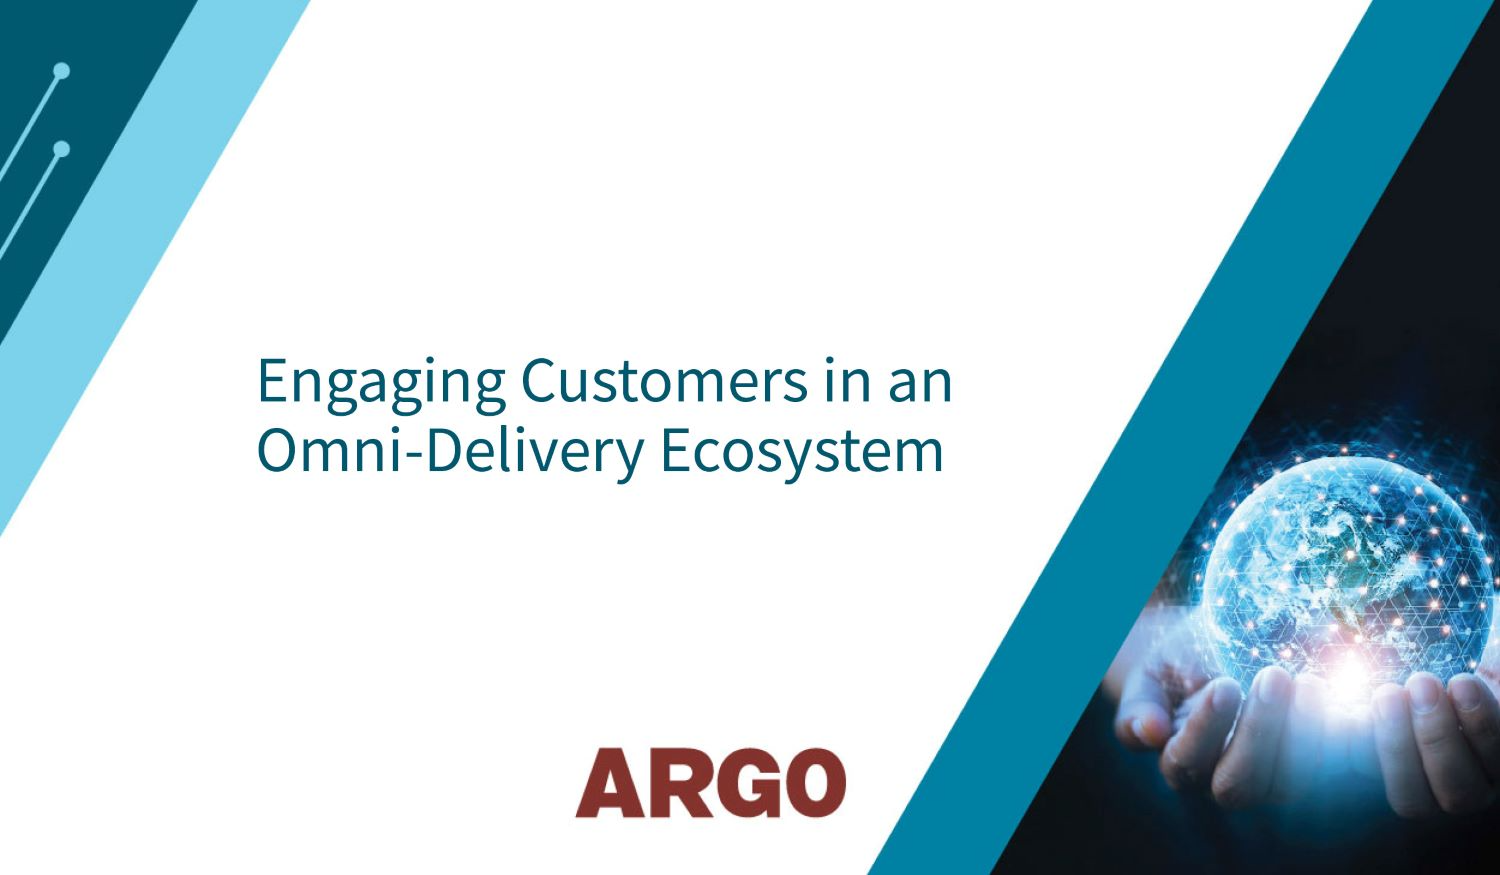 Engaging Customers in an Omni-Delivery Ecosystem